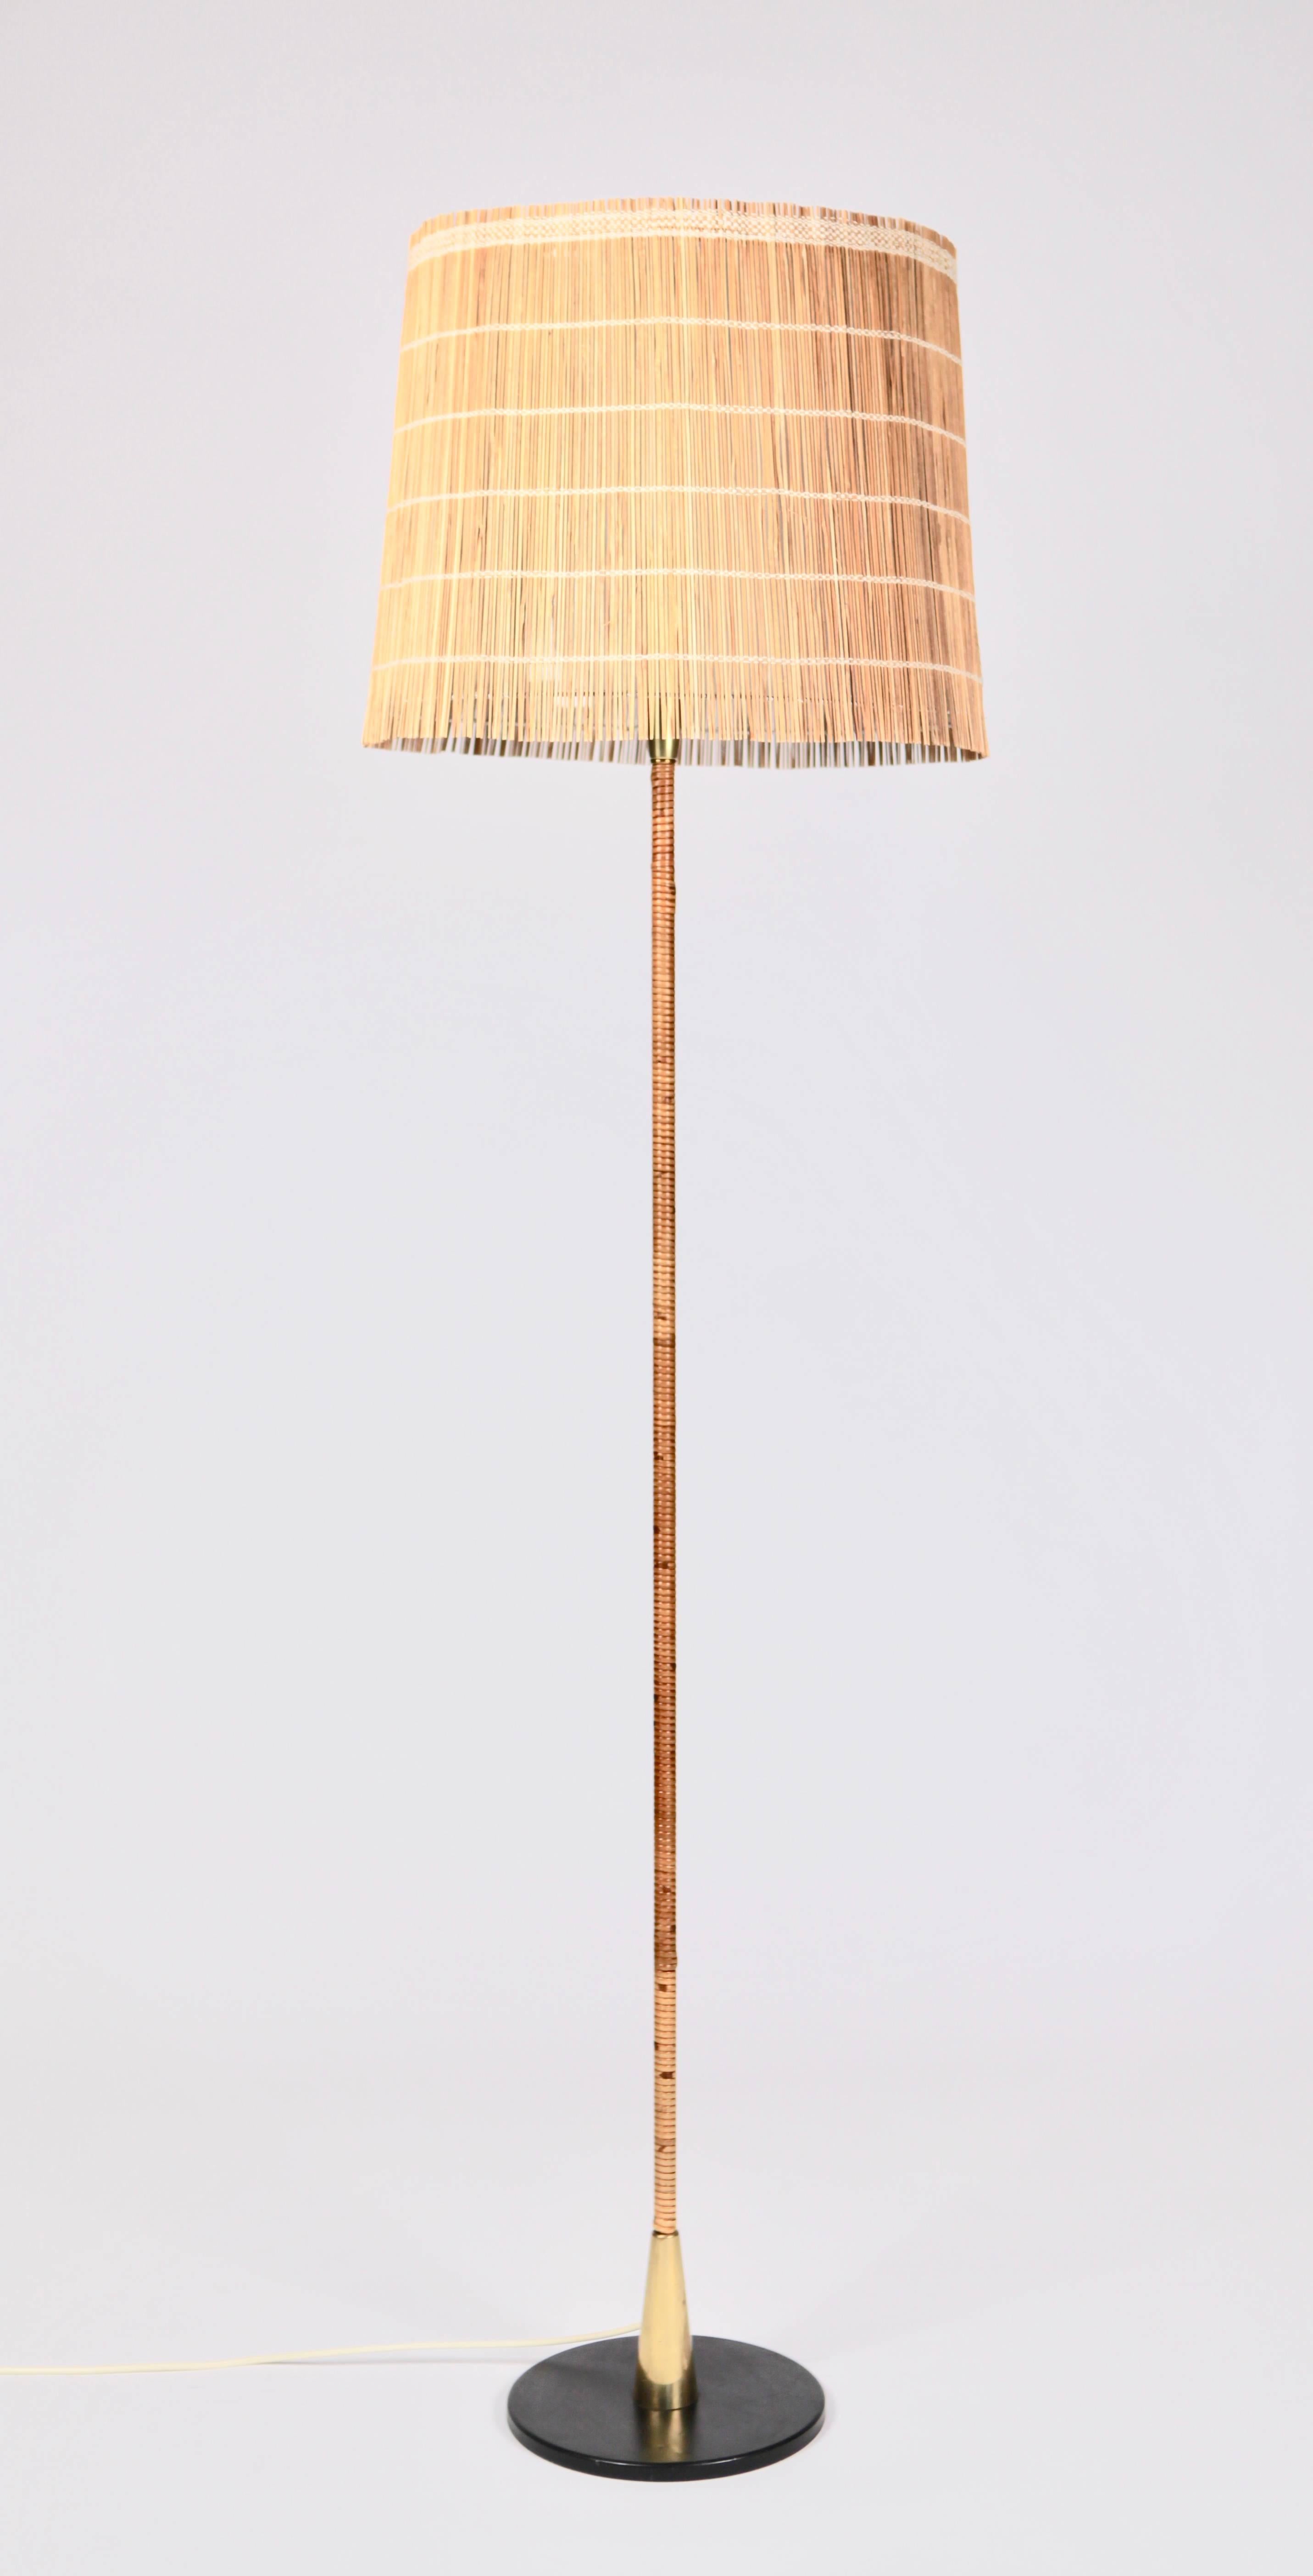 Paavo Tynell, floor lamp manufactured by Idman Oy in Finland in the 1950s.

Impressed with manufacturers label 